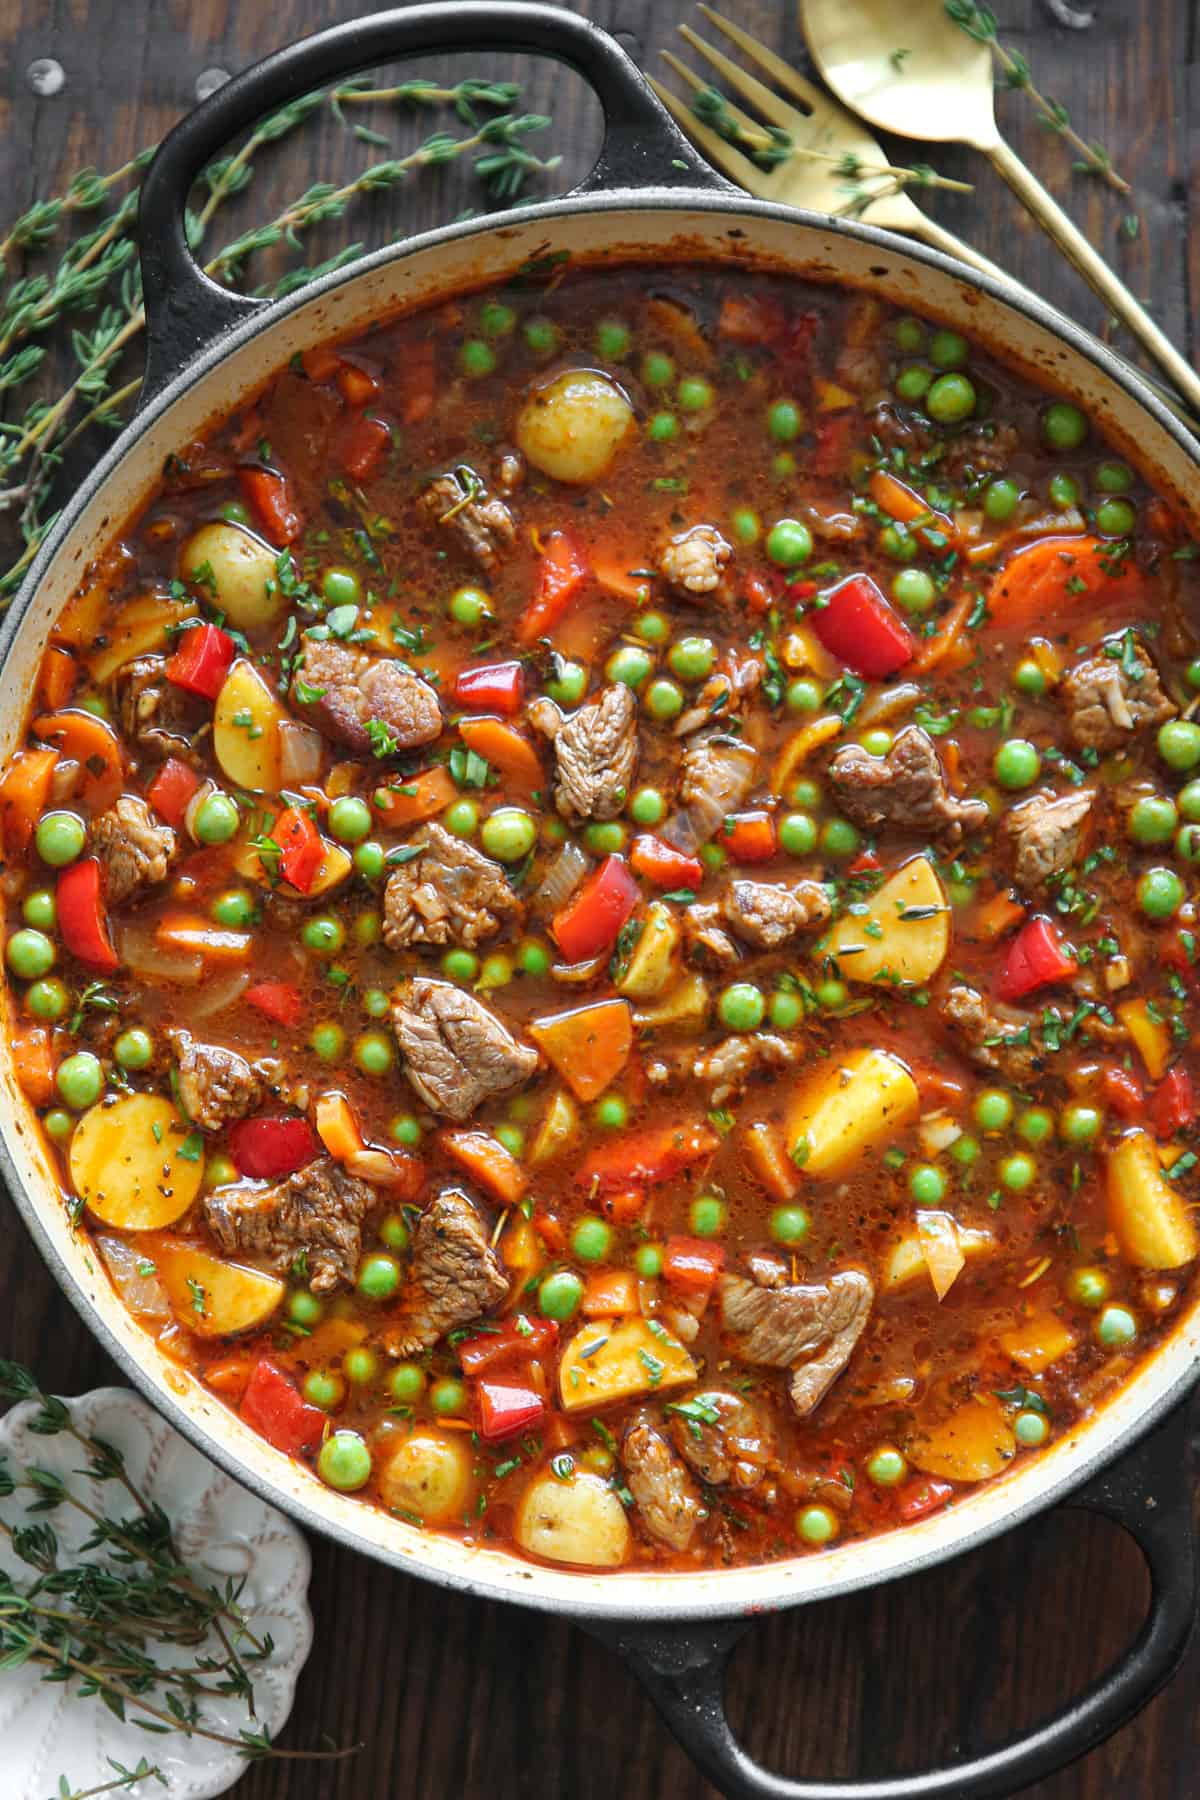 Vegetable beef soup with onions, garlic, carrots, potatoes, bell peppers, and green peas - in a pot.